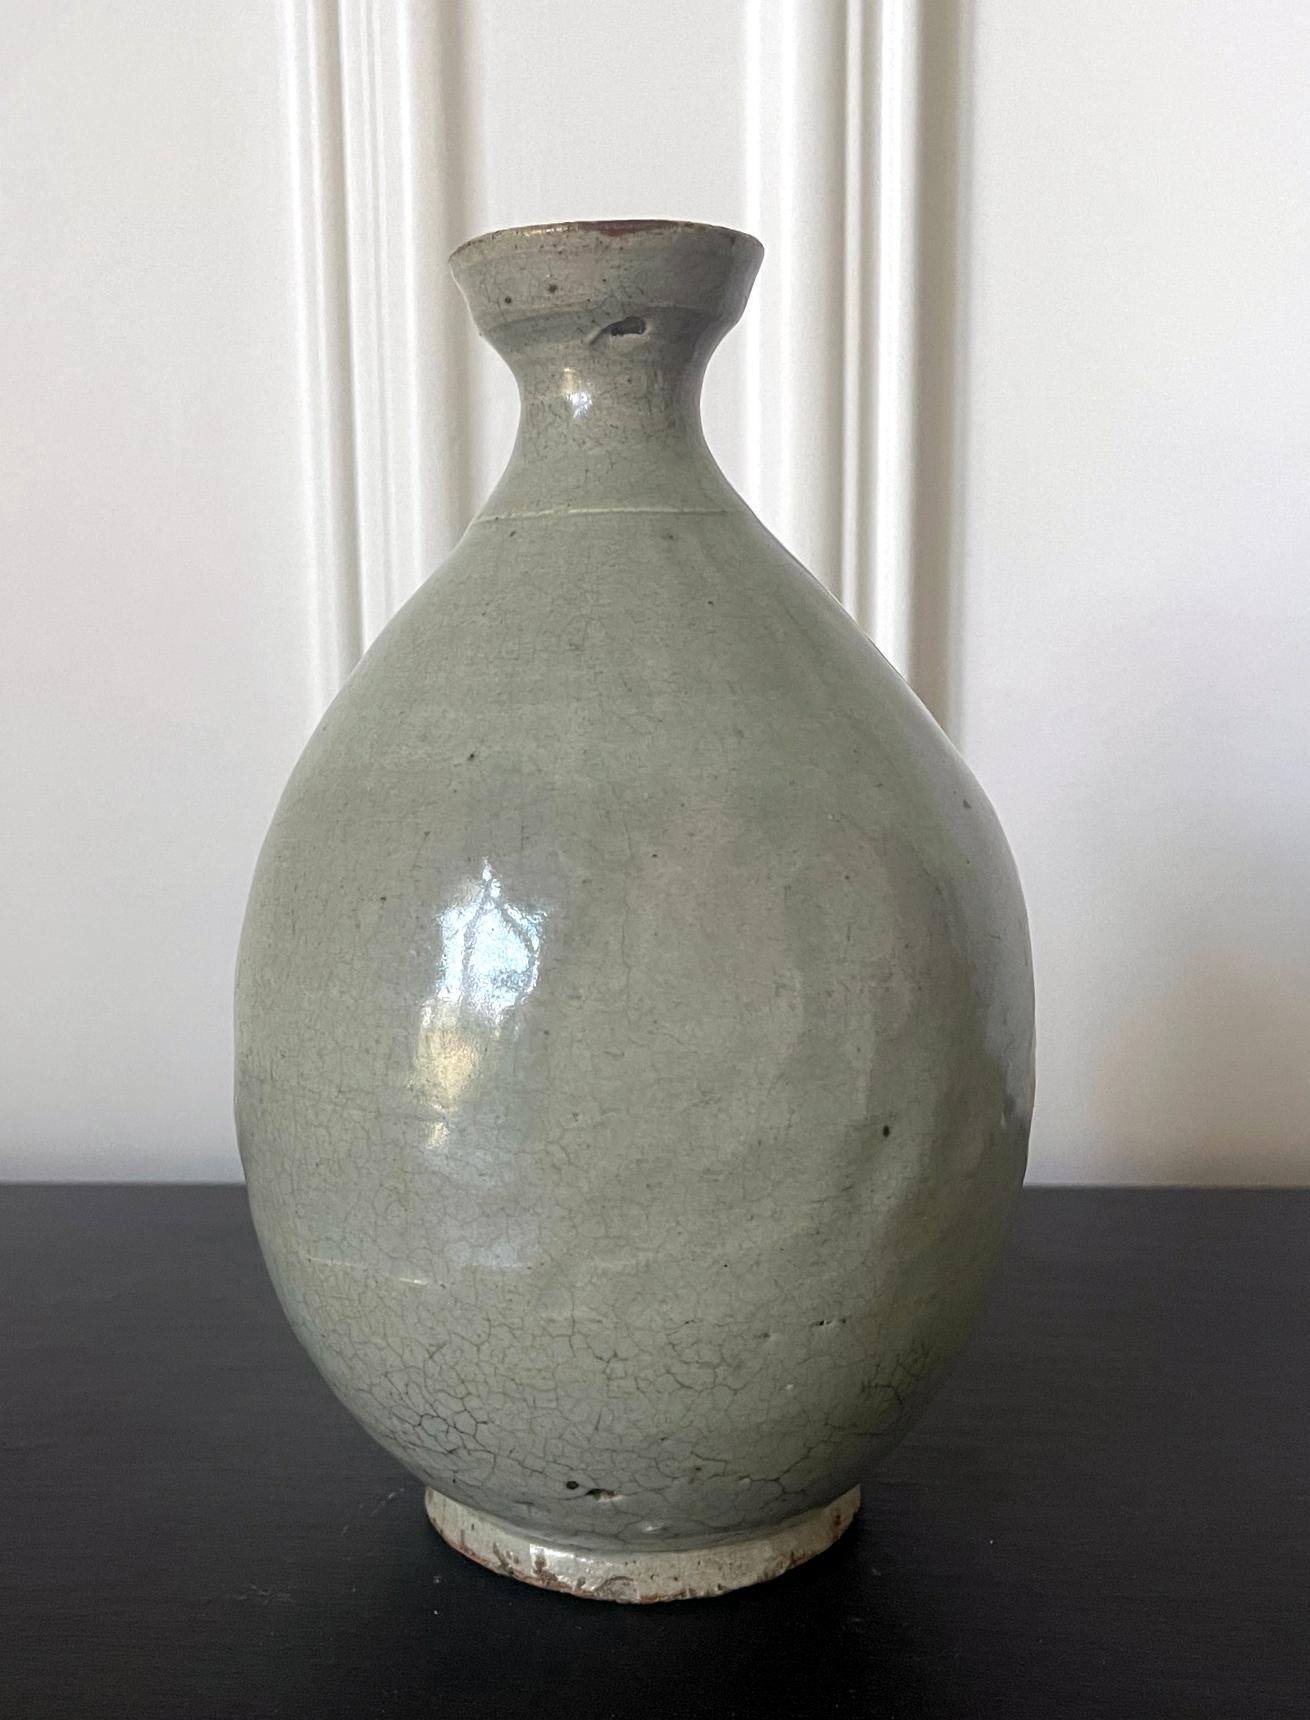 A Korean ceramic bottle-form vase circa 16th century Joseon Dynasty. It was likely intended as a wine bottle, the pear-shaped vessel with flaring neck feature a celadon glaze exterior with subtle incised patterns around the neck and mid-body.